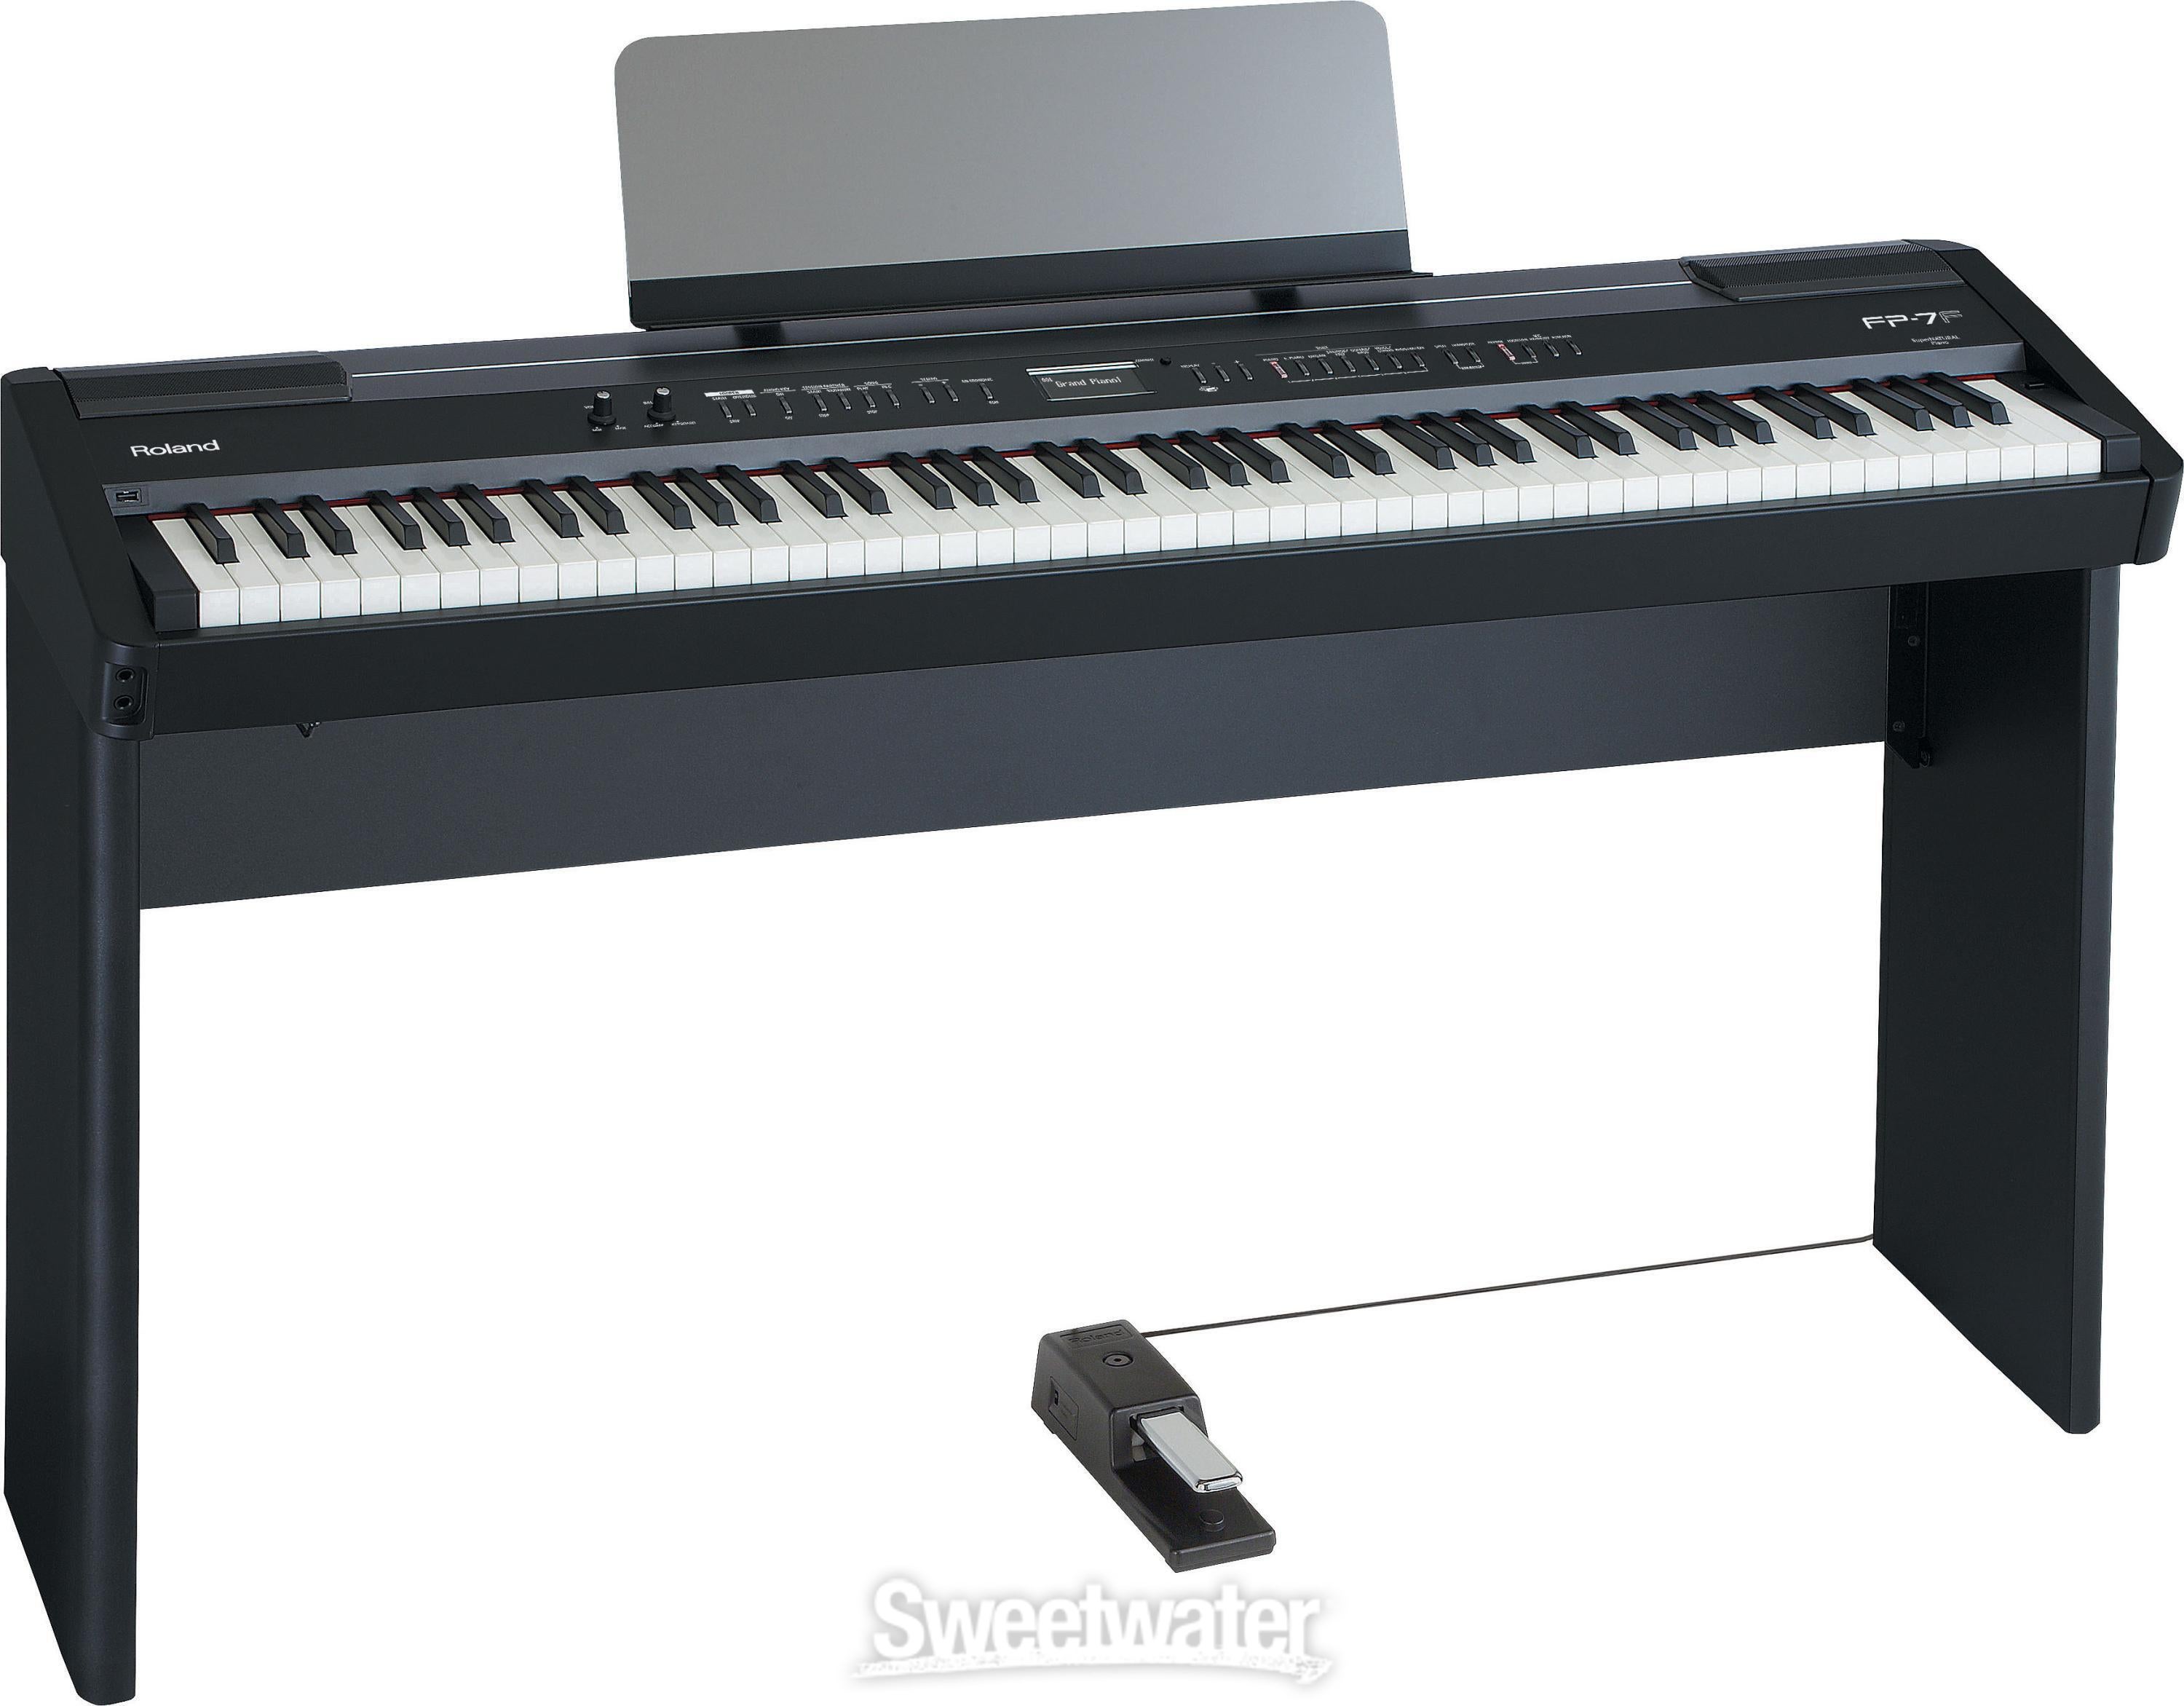 Roland FP-7F - Black | Sweetwater